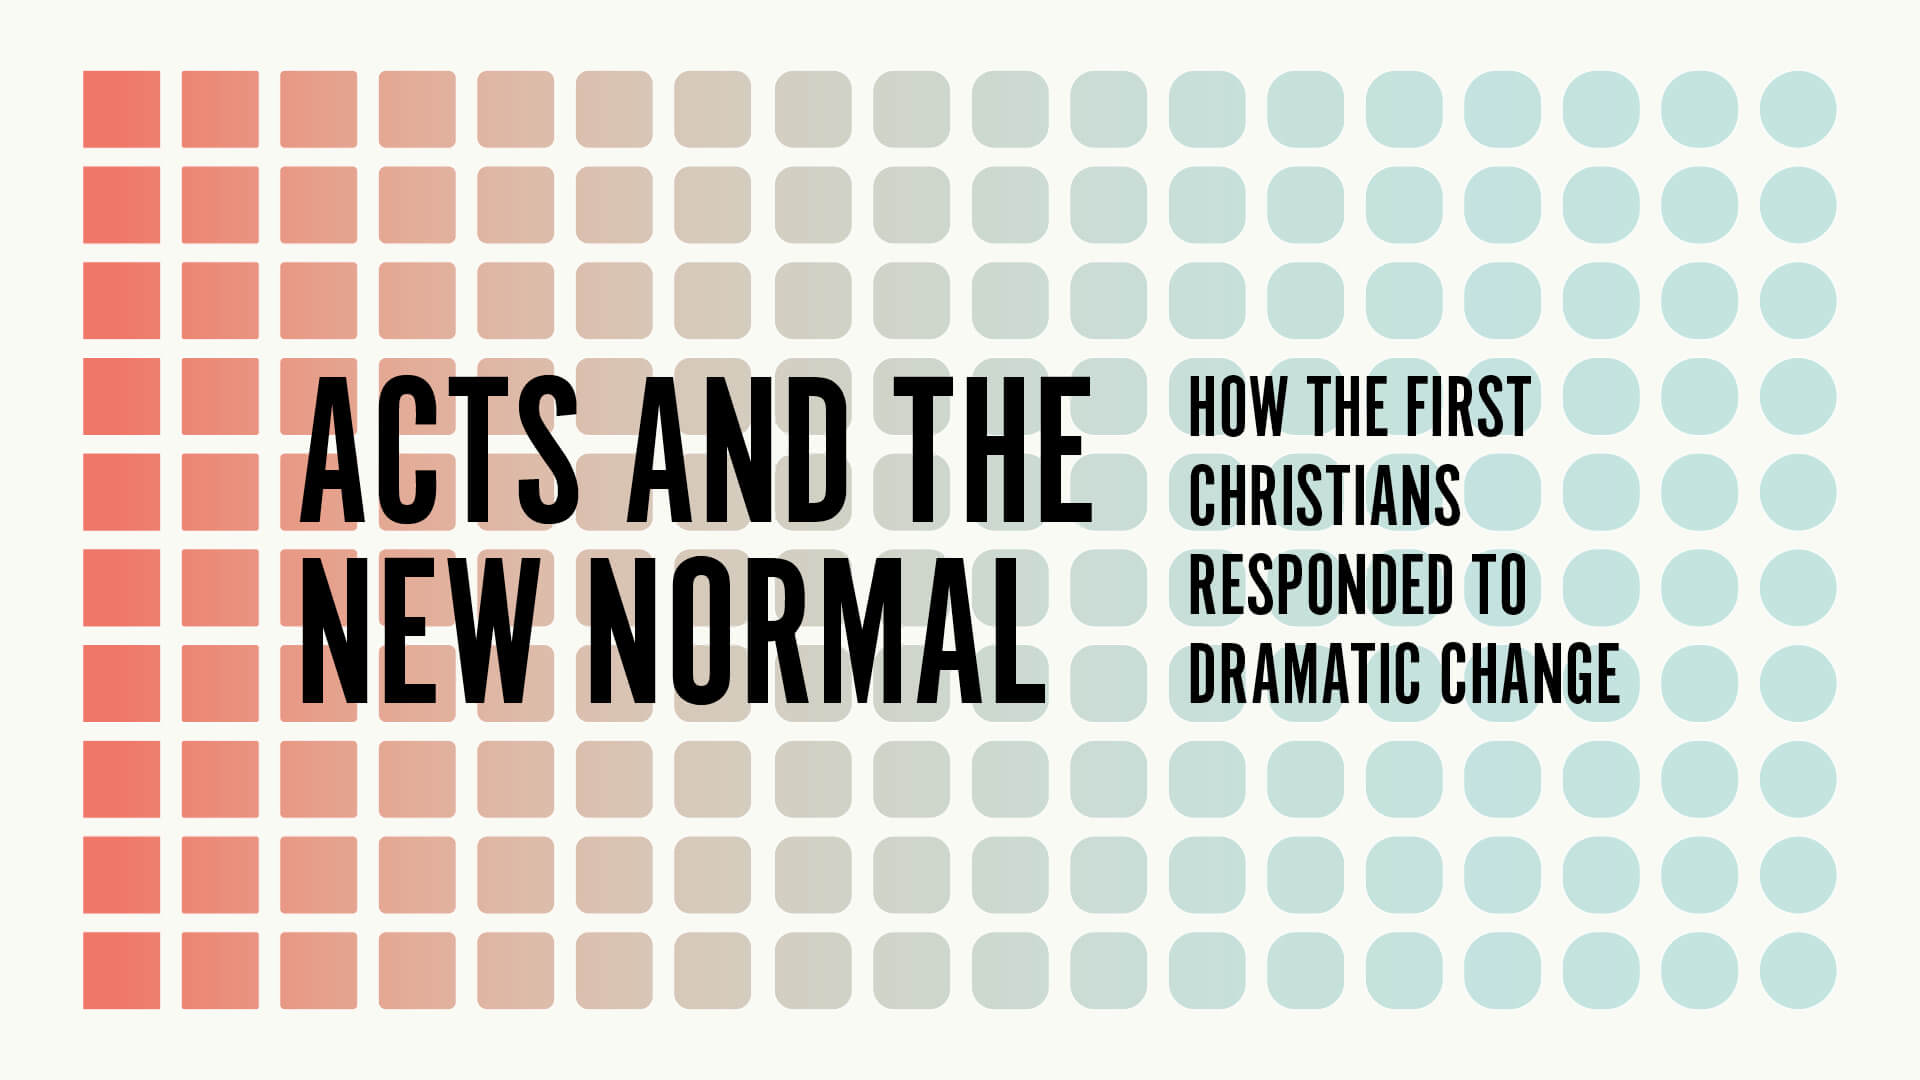 Acts and the New Normal